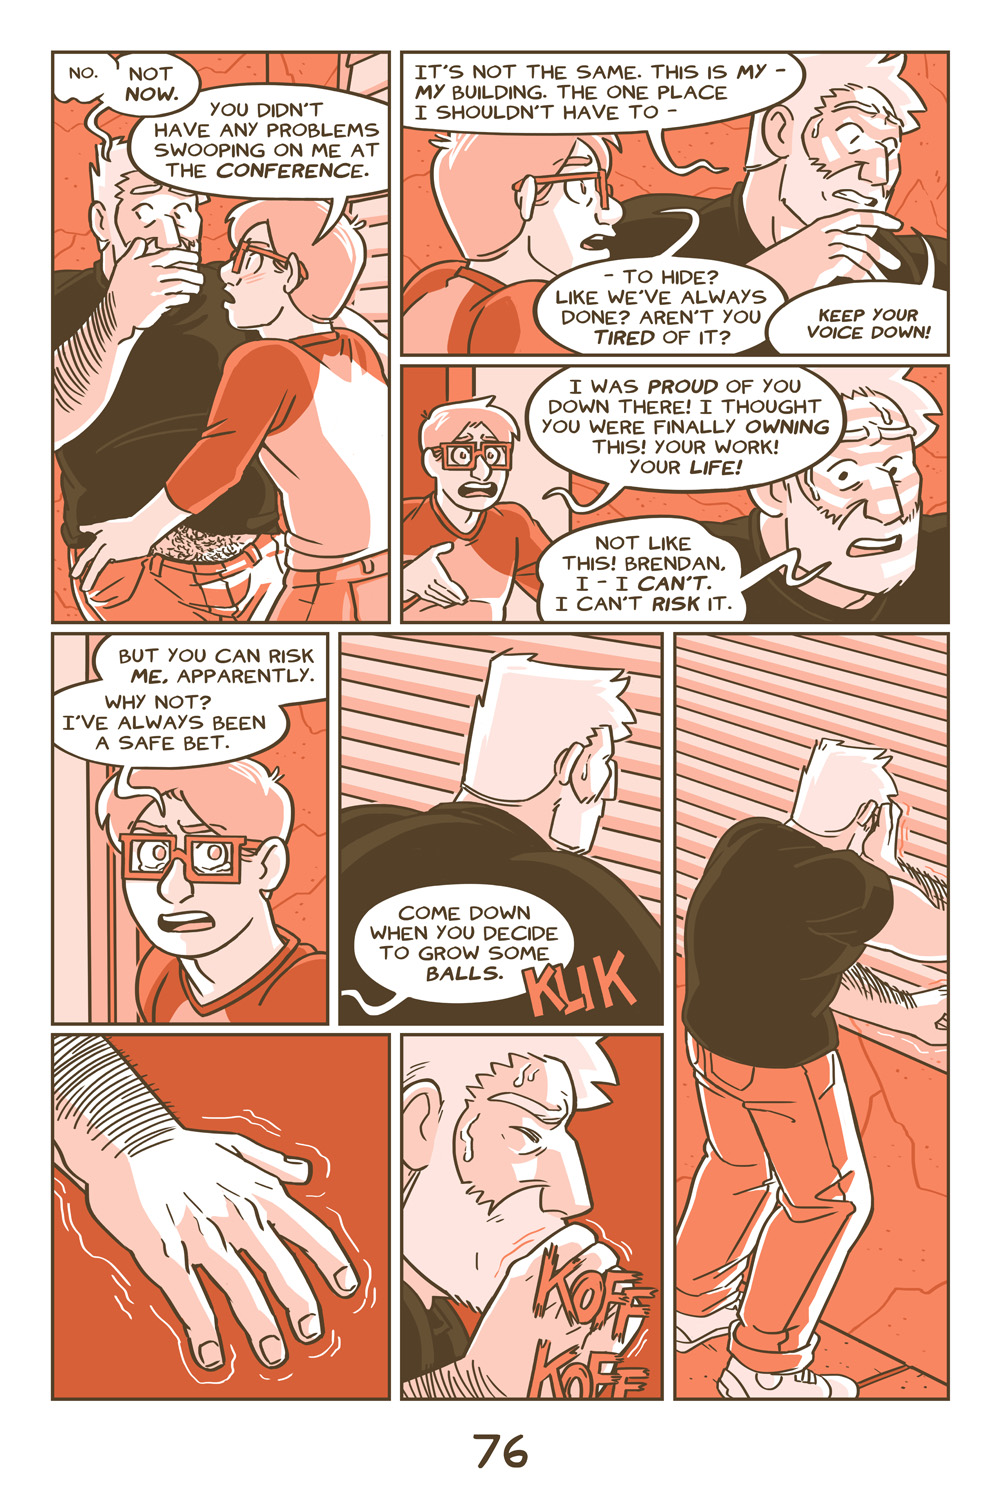 Chapter 4, Page 76